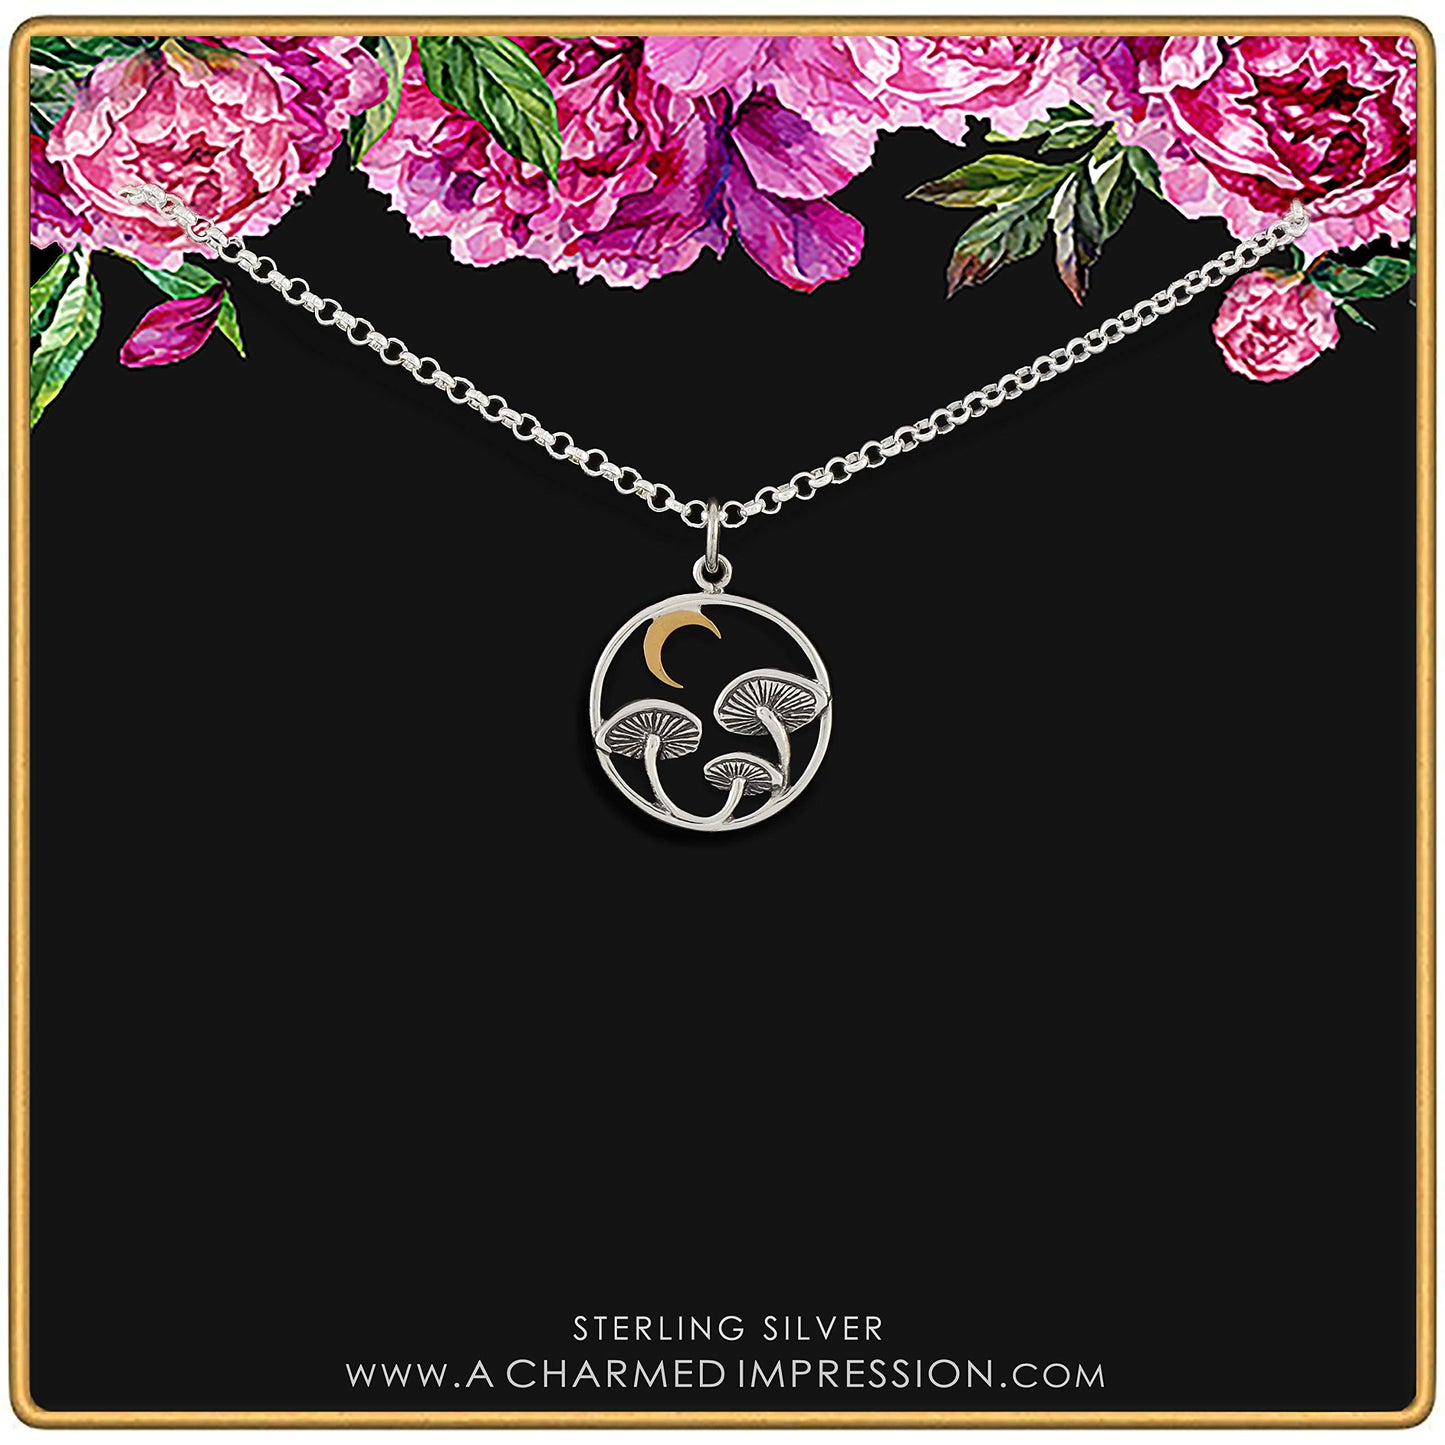 Sterling Silver Mushroom Charm Necklace • Bronze Crescent Moon • Two Tone Crescent Moon Pendant • Celestial • Mushroom Charm Jewelry